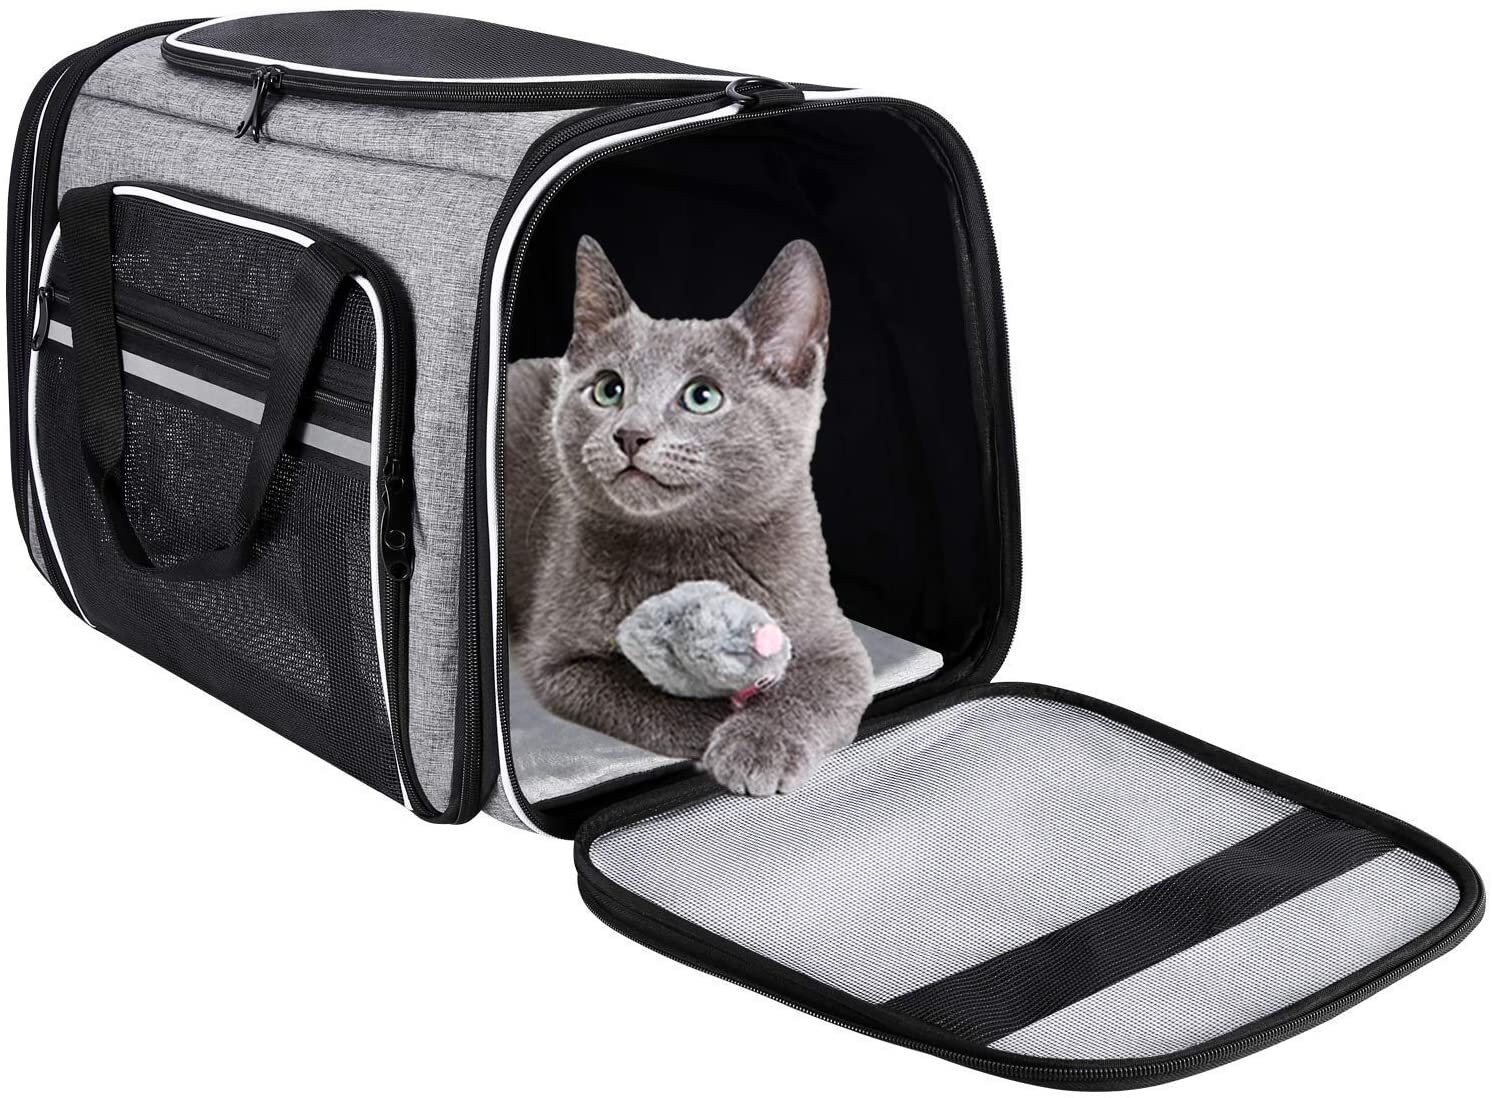 Full Cheeks; Small Pet Top Entry Travel Carrier | PetSmart